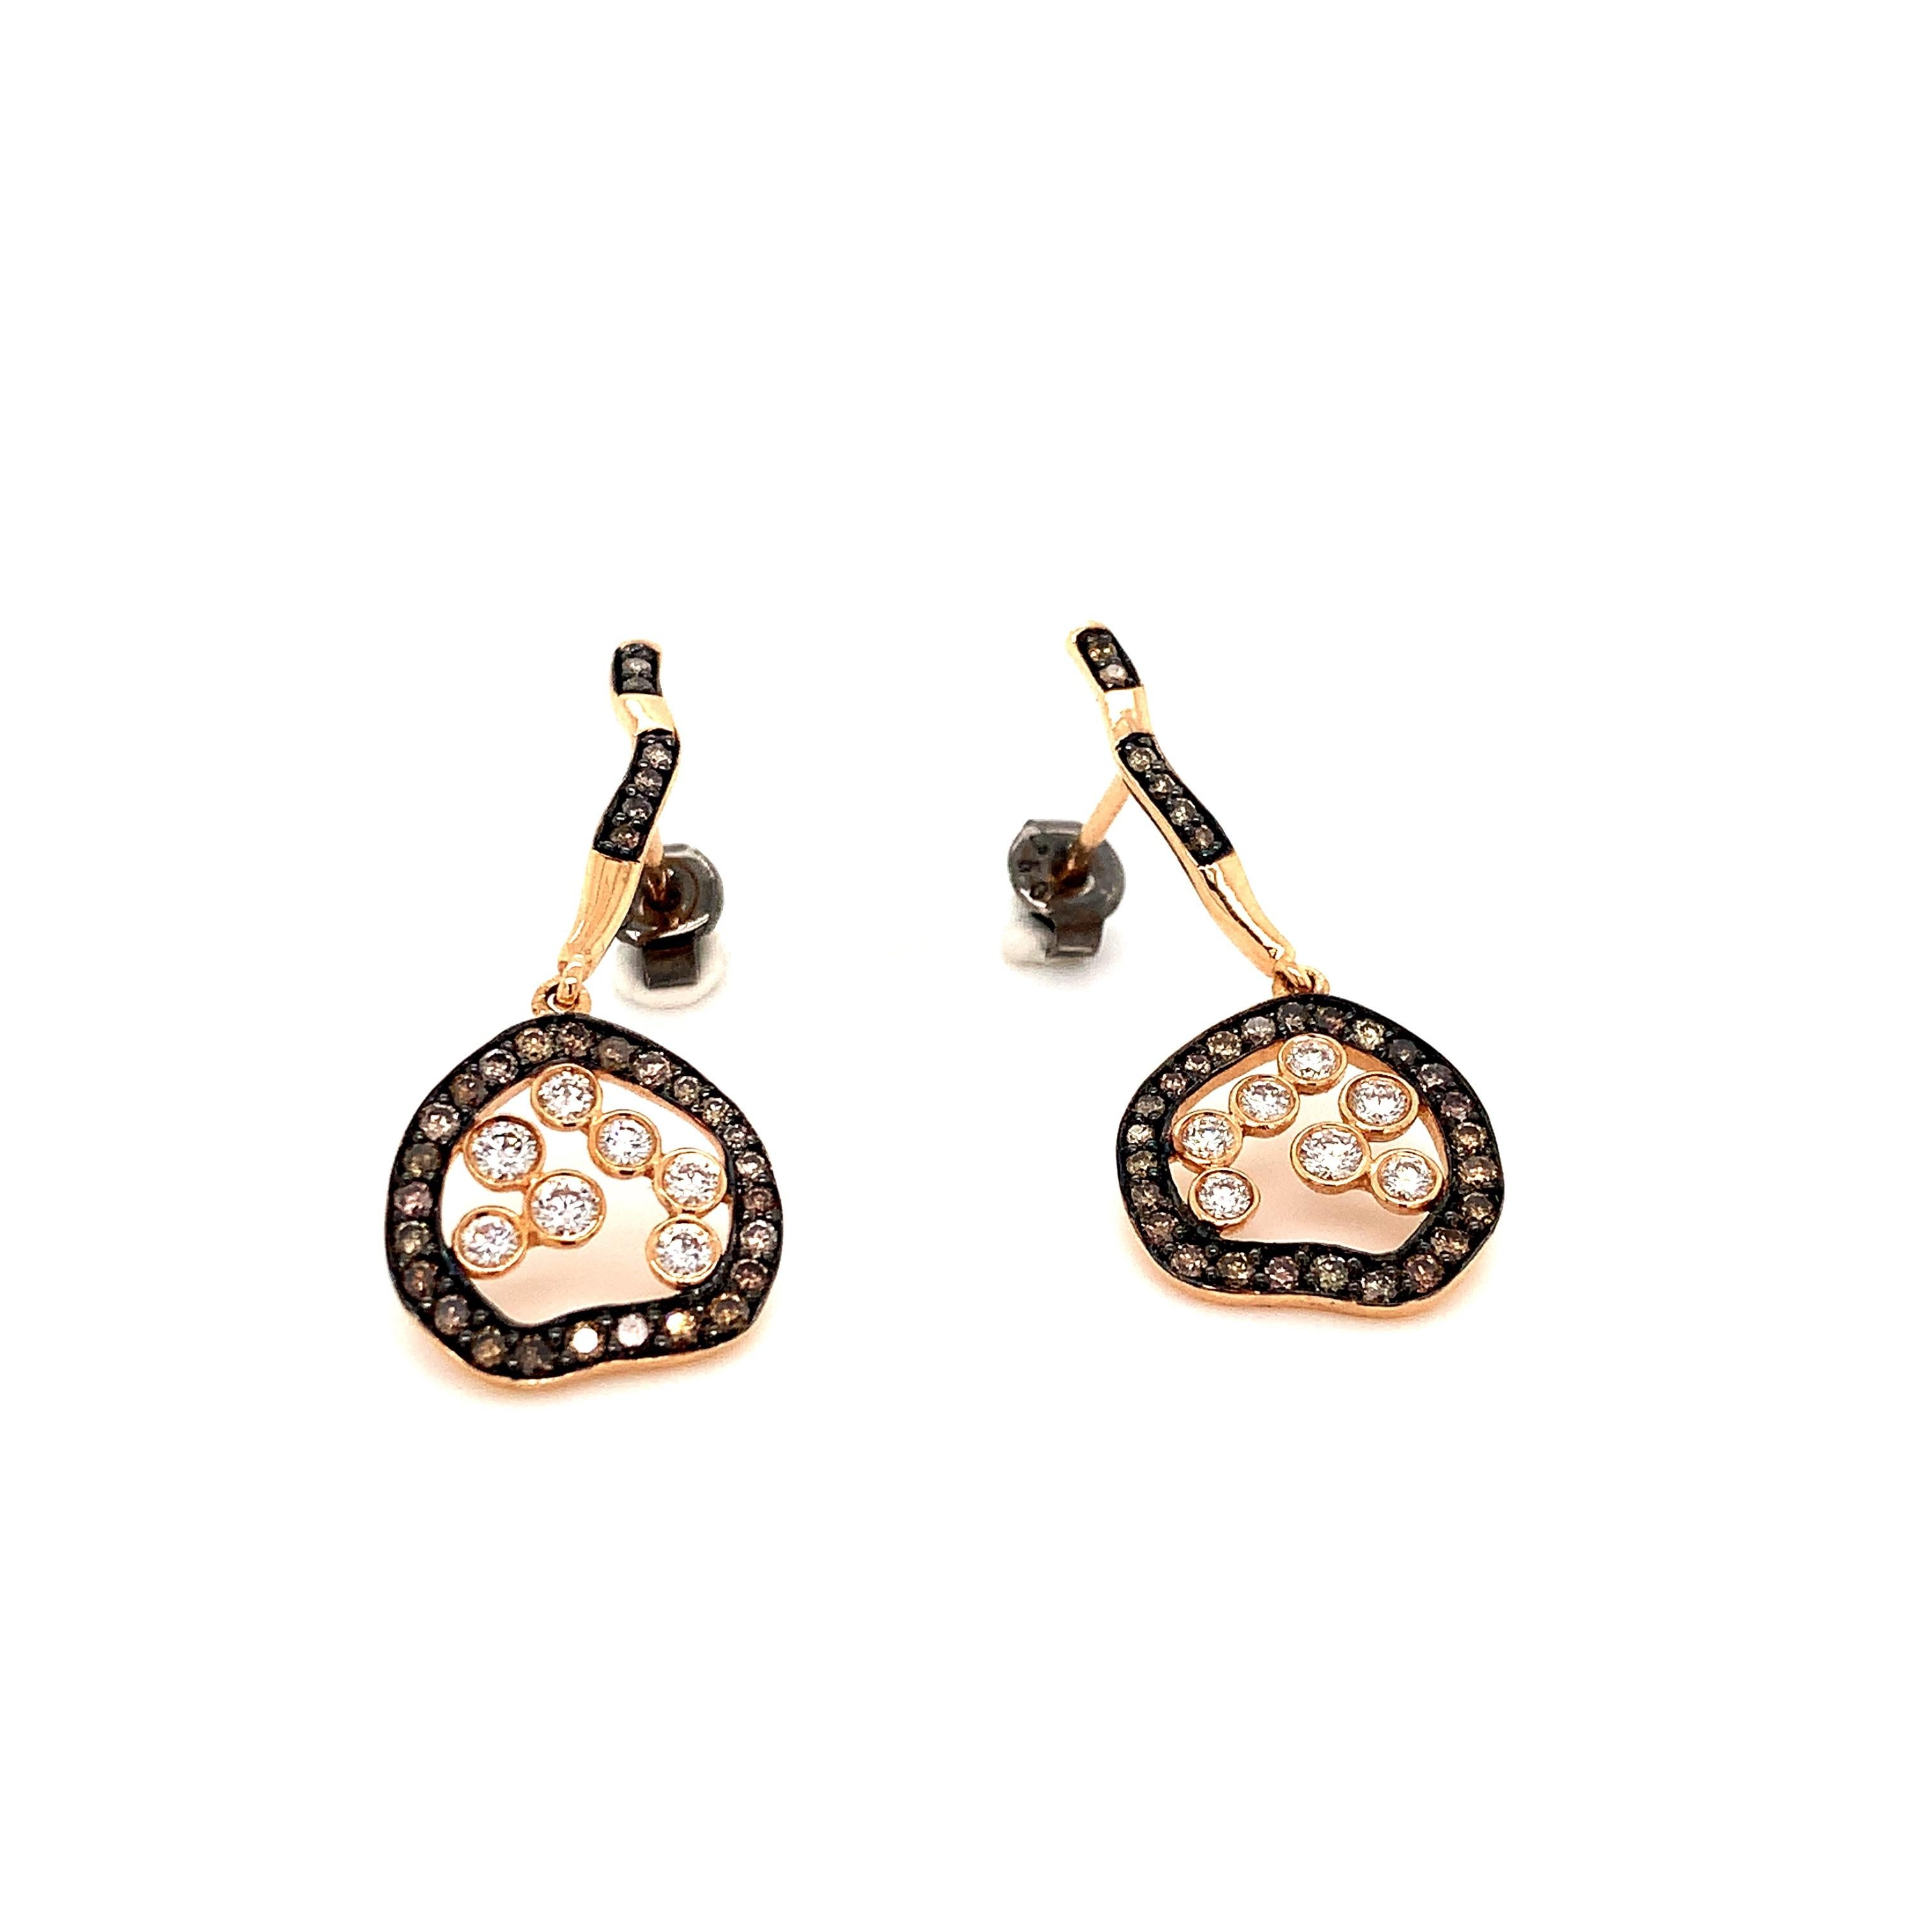 OWN Your Story 18K Rose Gold White and Cognac Diamond Inverse Circular Sign Contrast Earrings

OWN Your Story brings its 3 generations of family tradition and unparalleled experience with 18K gold, diamonds, and gemstones to create high-level